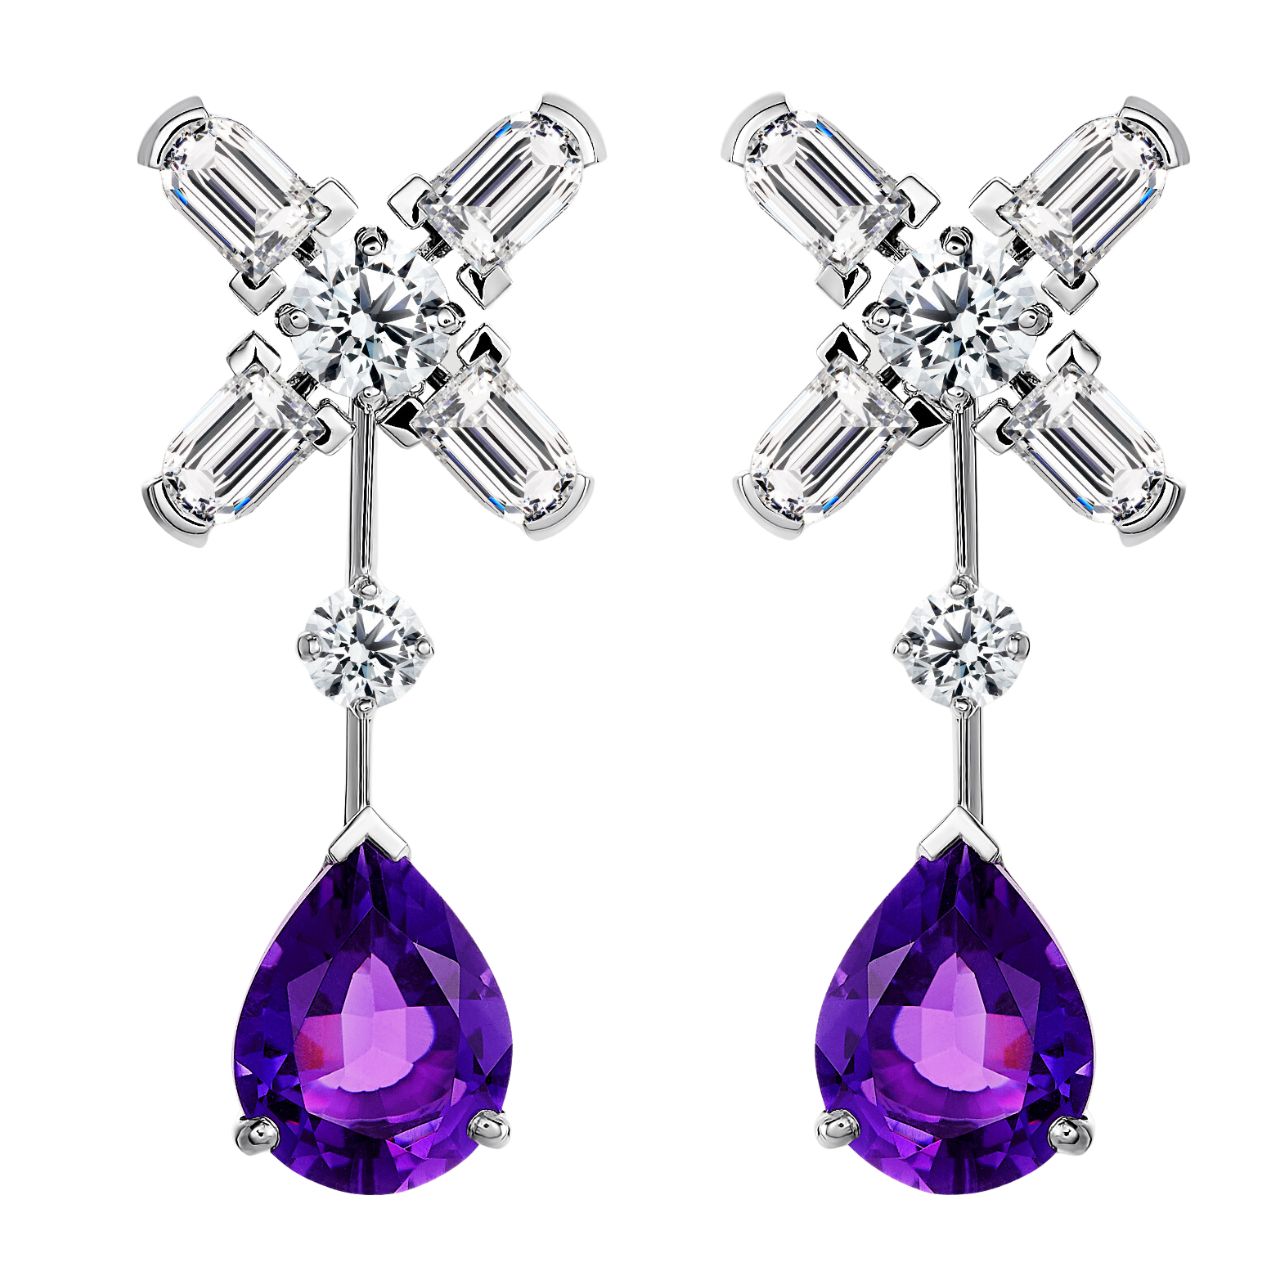 Arch Florale MM stud earrings in 18k white gold with signature arch-cut diamonds, brilliant diamonds, and removable amethyst pear drops.